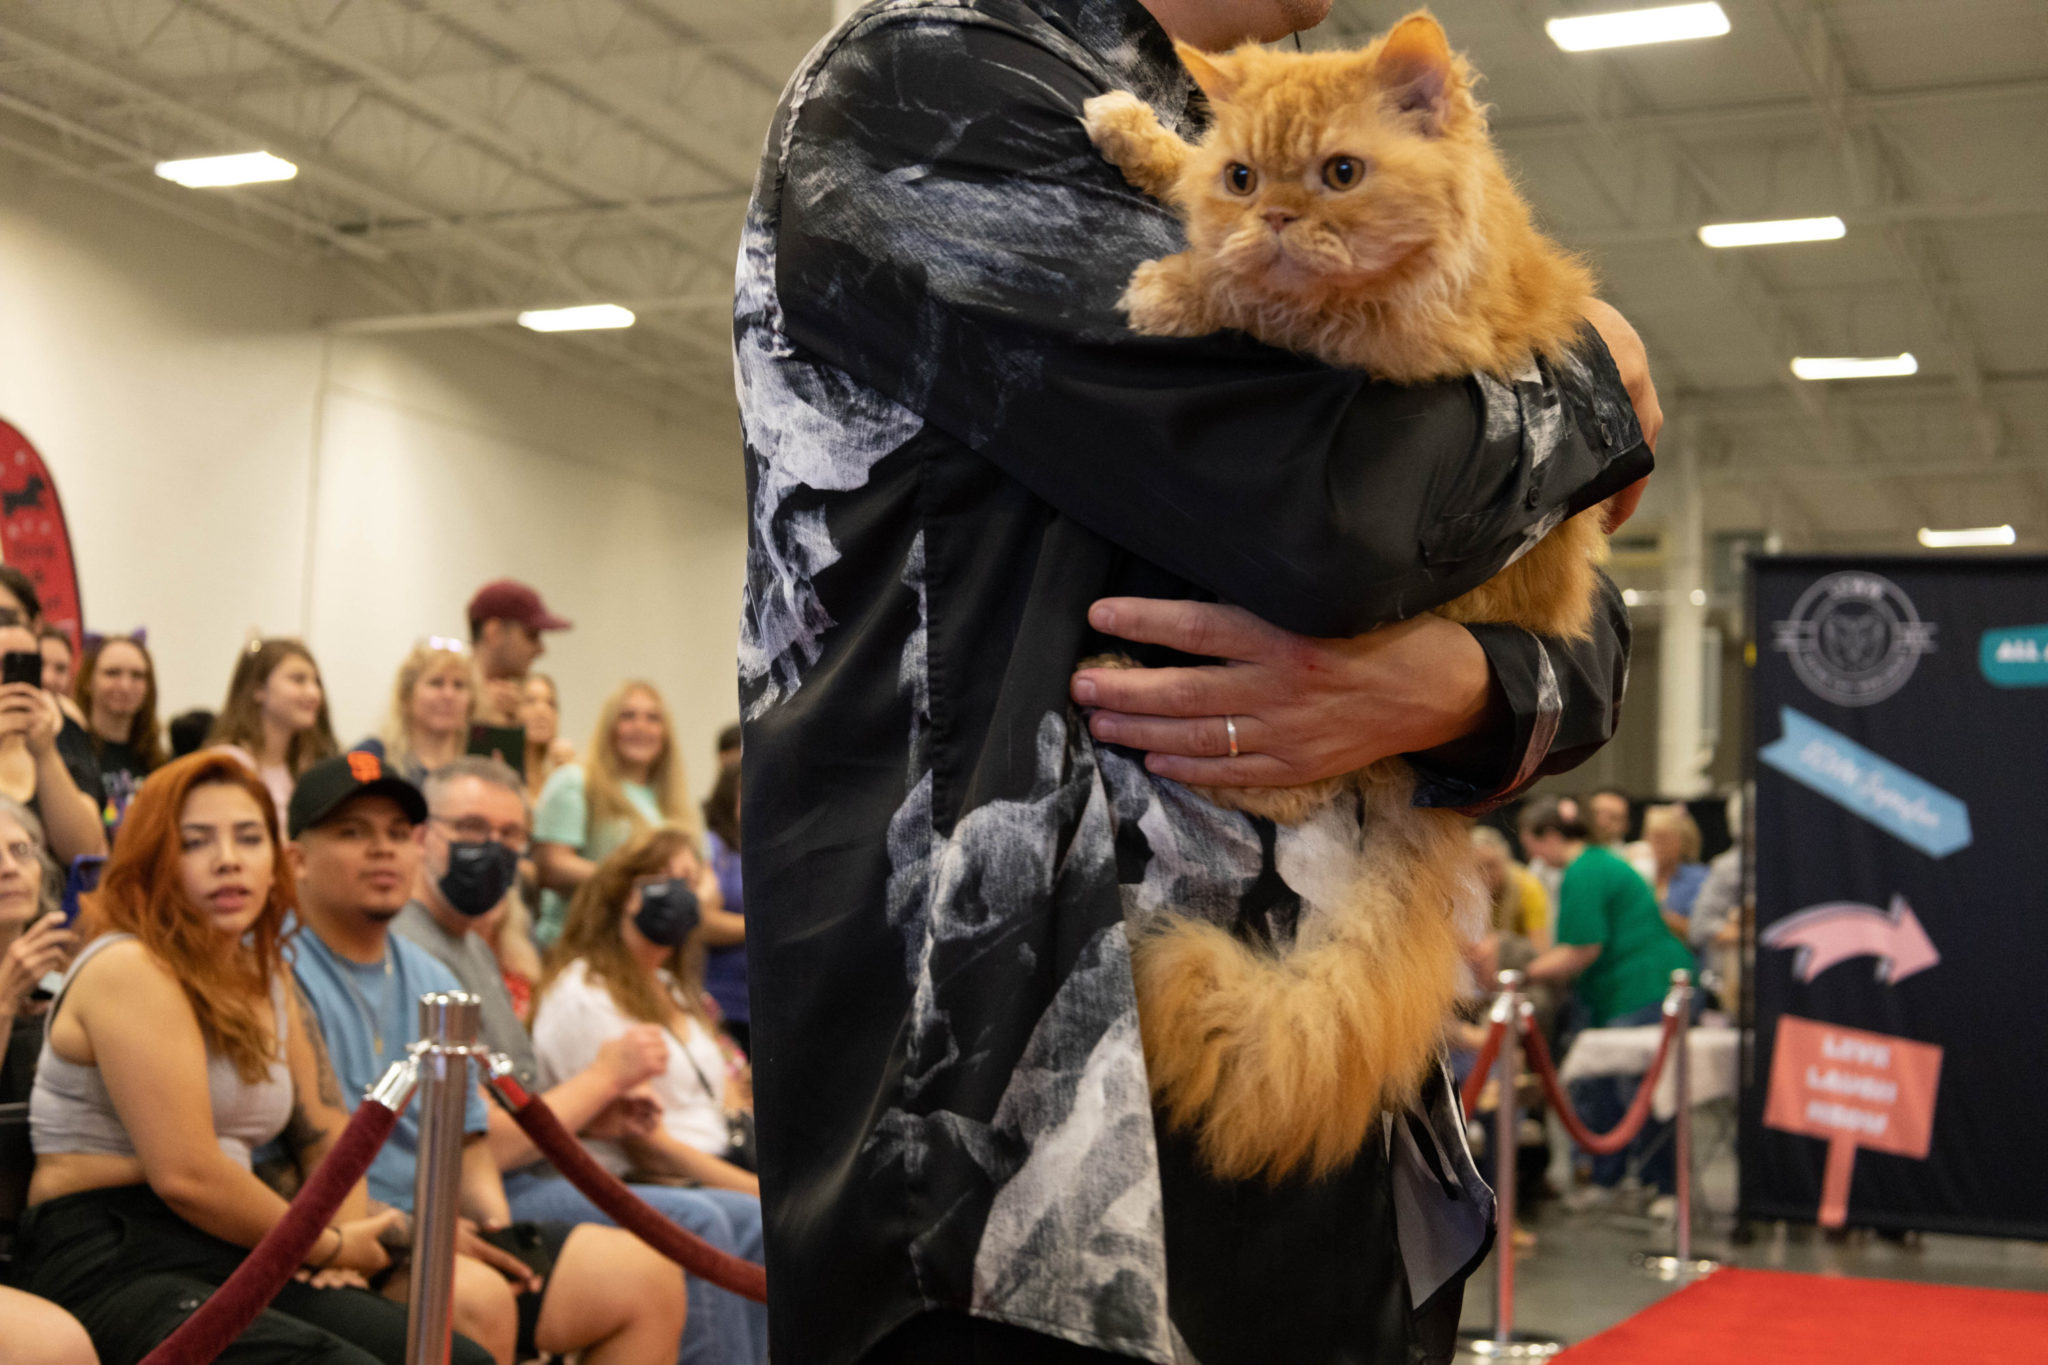 PHOTOS: See the Fancy Felines at the “Cat Extravaganza” Show in Virginia